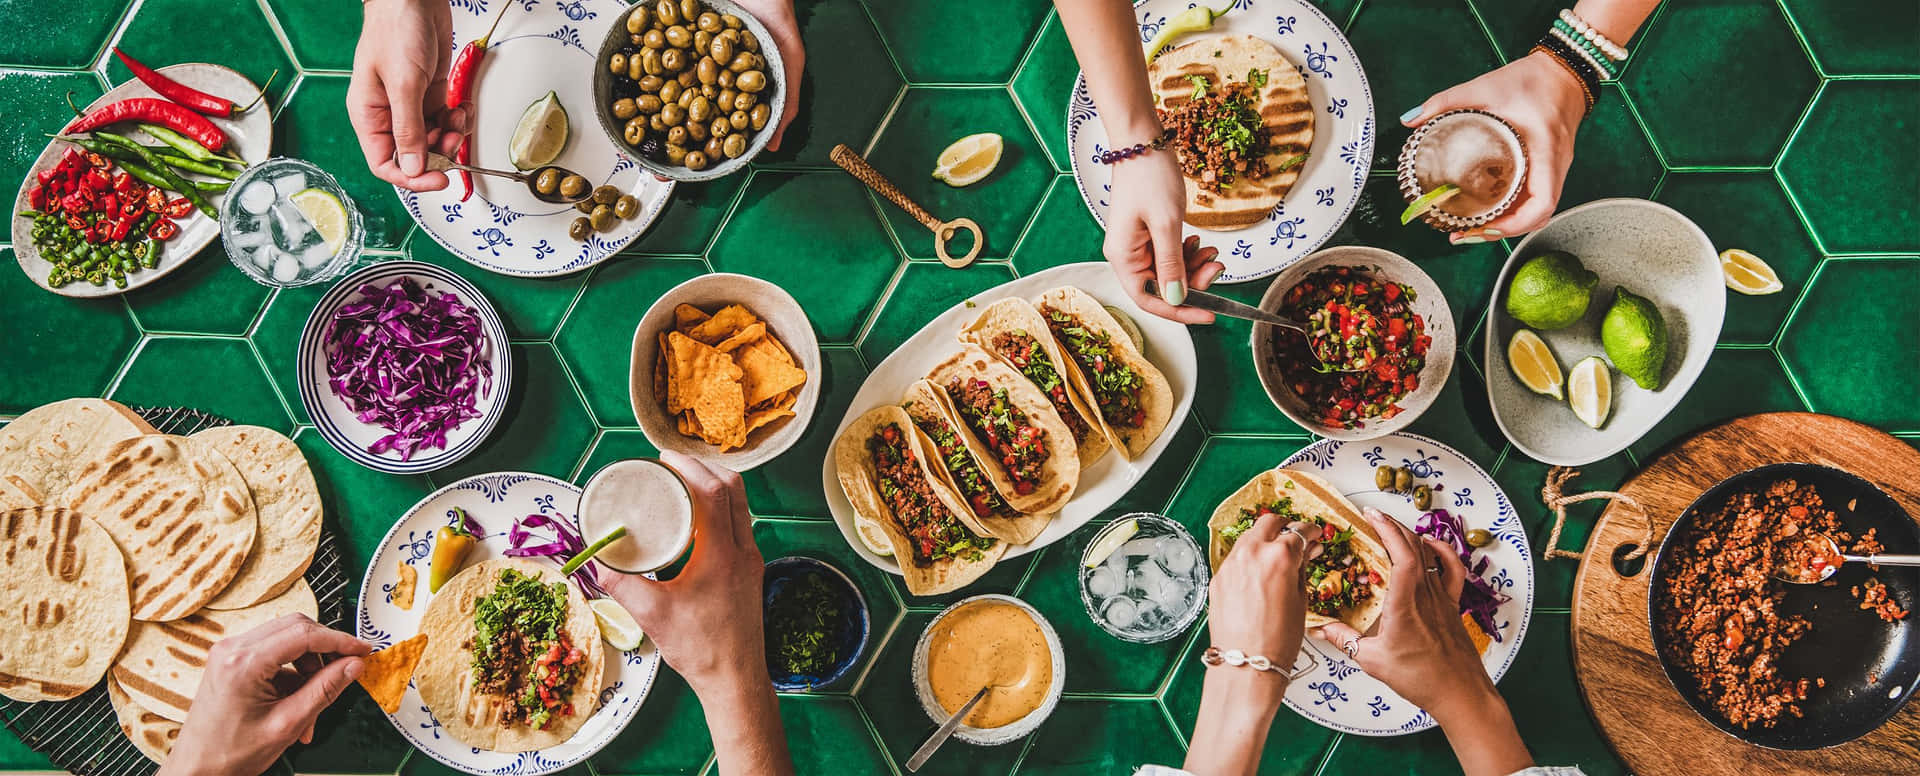 A Group Of People Eating Food On A Green Tiled Table